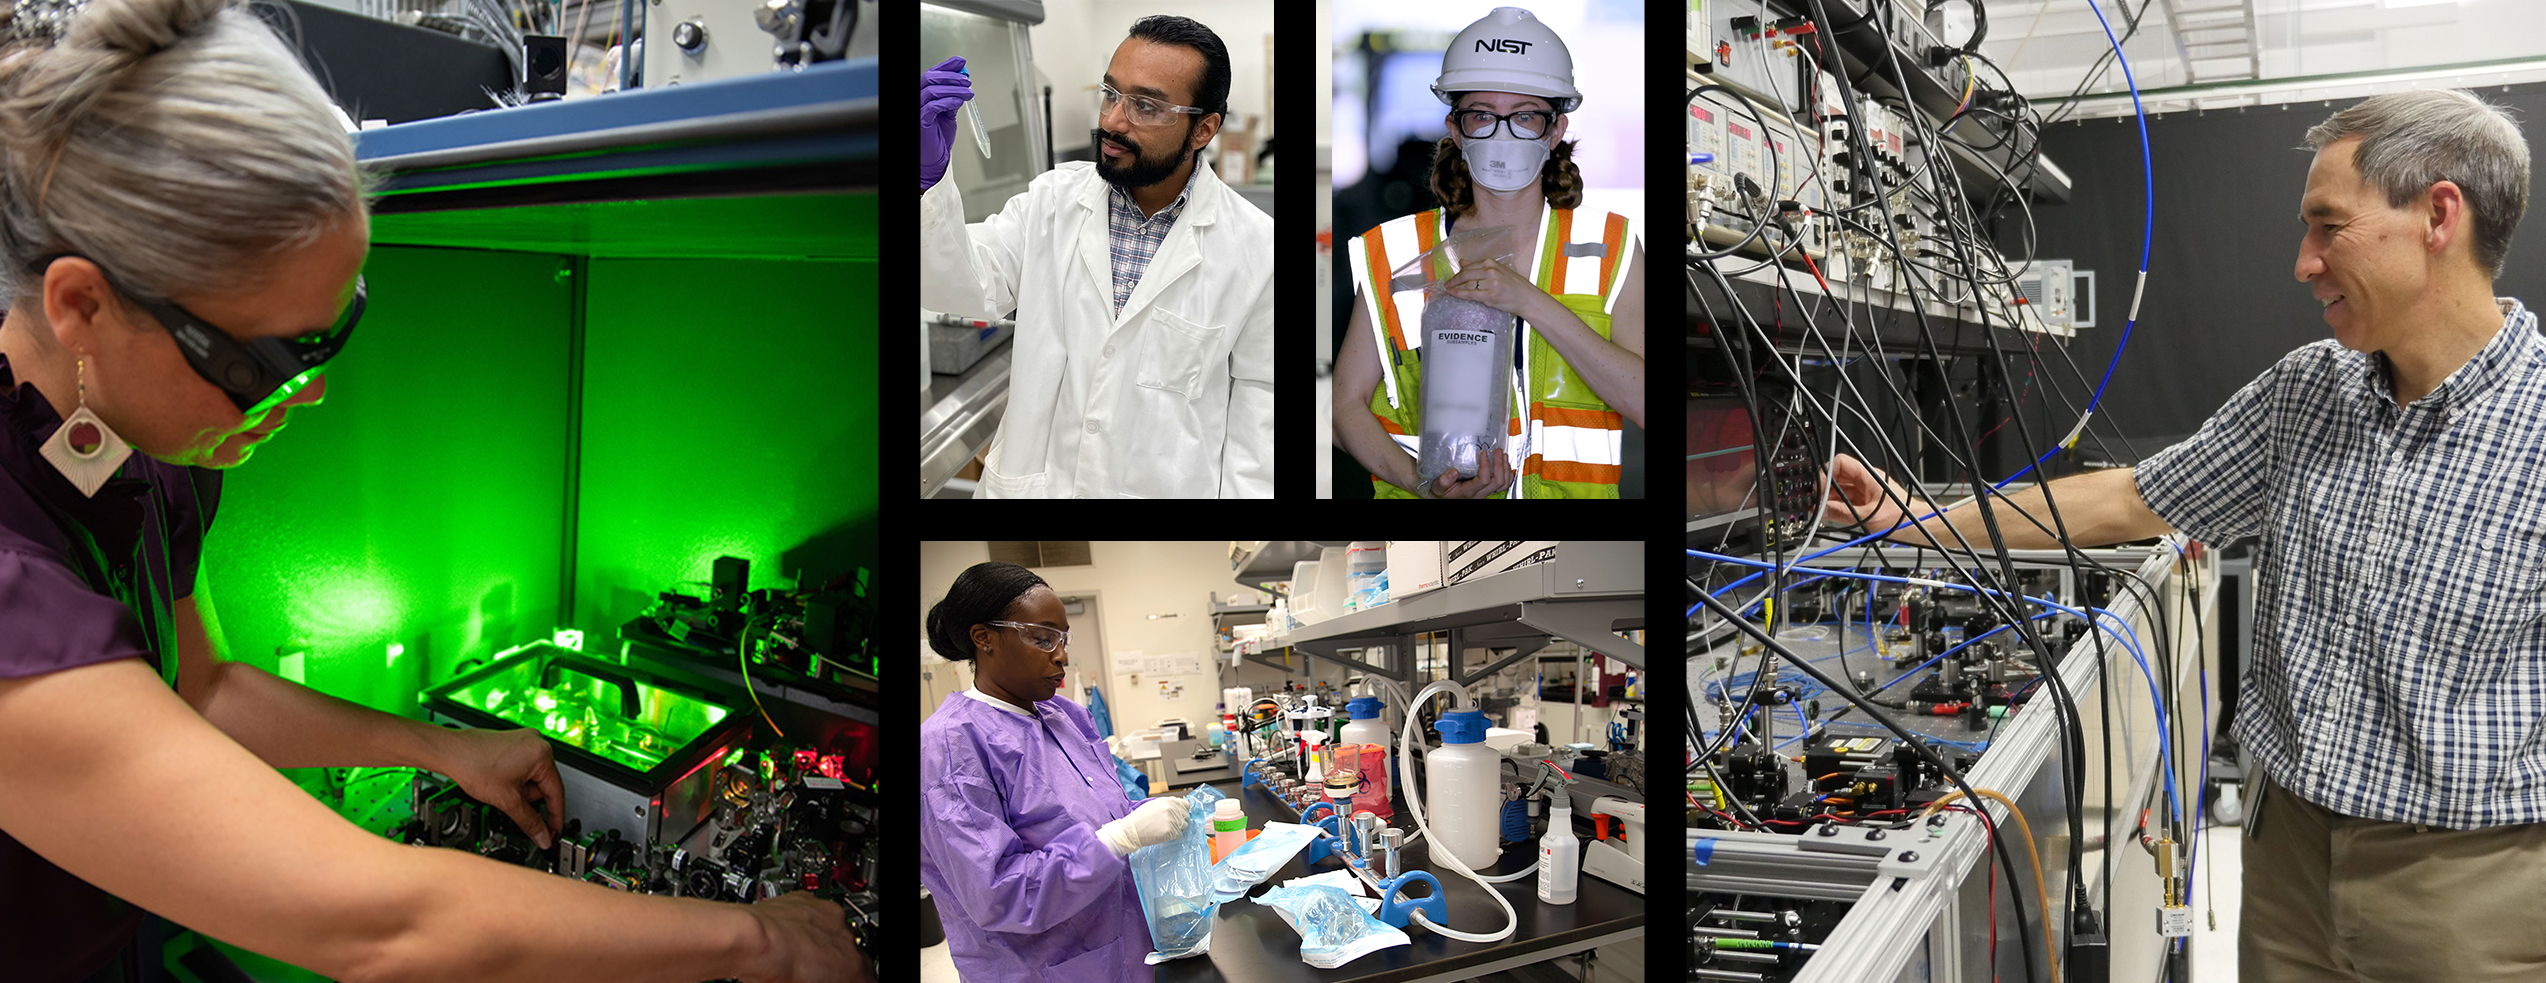 5 pictures. Far left: Woman in goggles with atomic clock. Center top left: Man in goggles with test tube. Center top right: Woman in hard hat and goggles carrying a package that says EVIDENCE. Center bottom: Woman in goggles in lab. Right: Man with atomic clock.